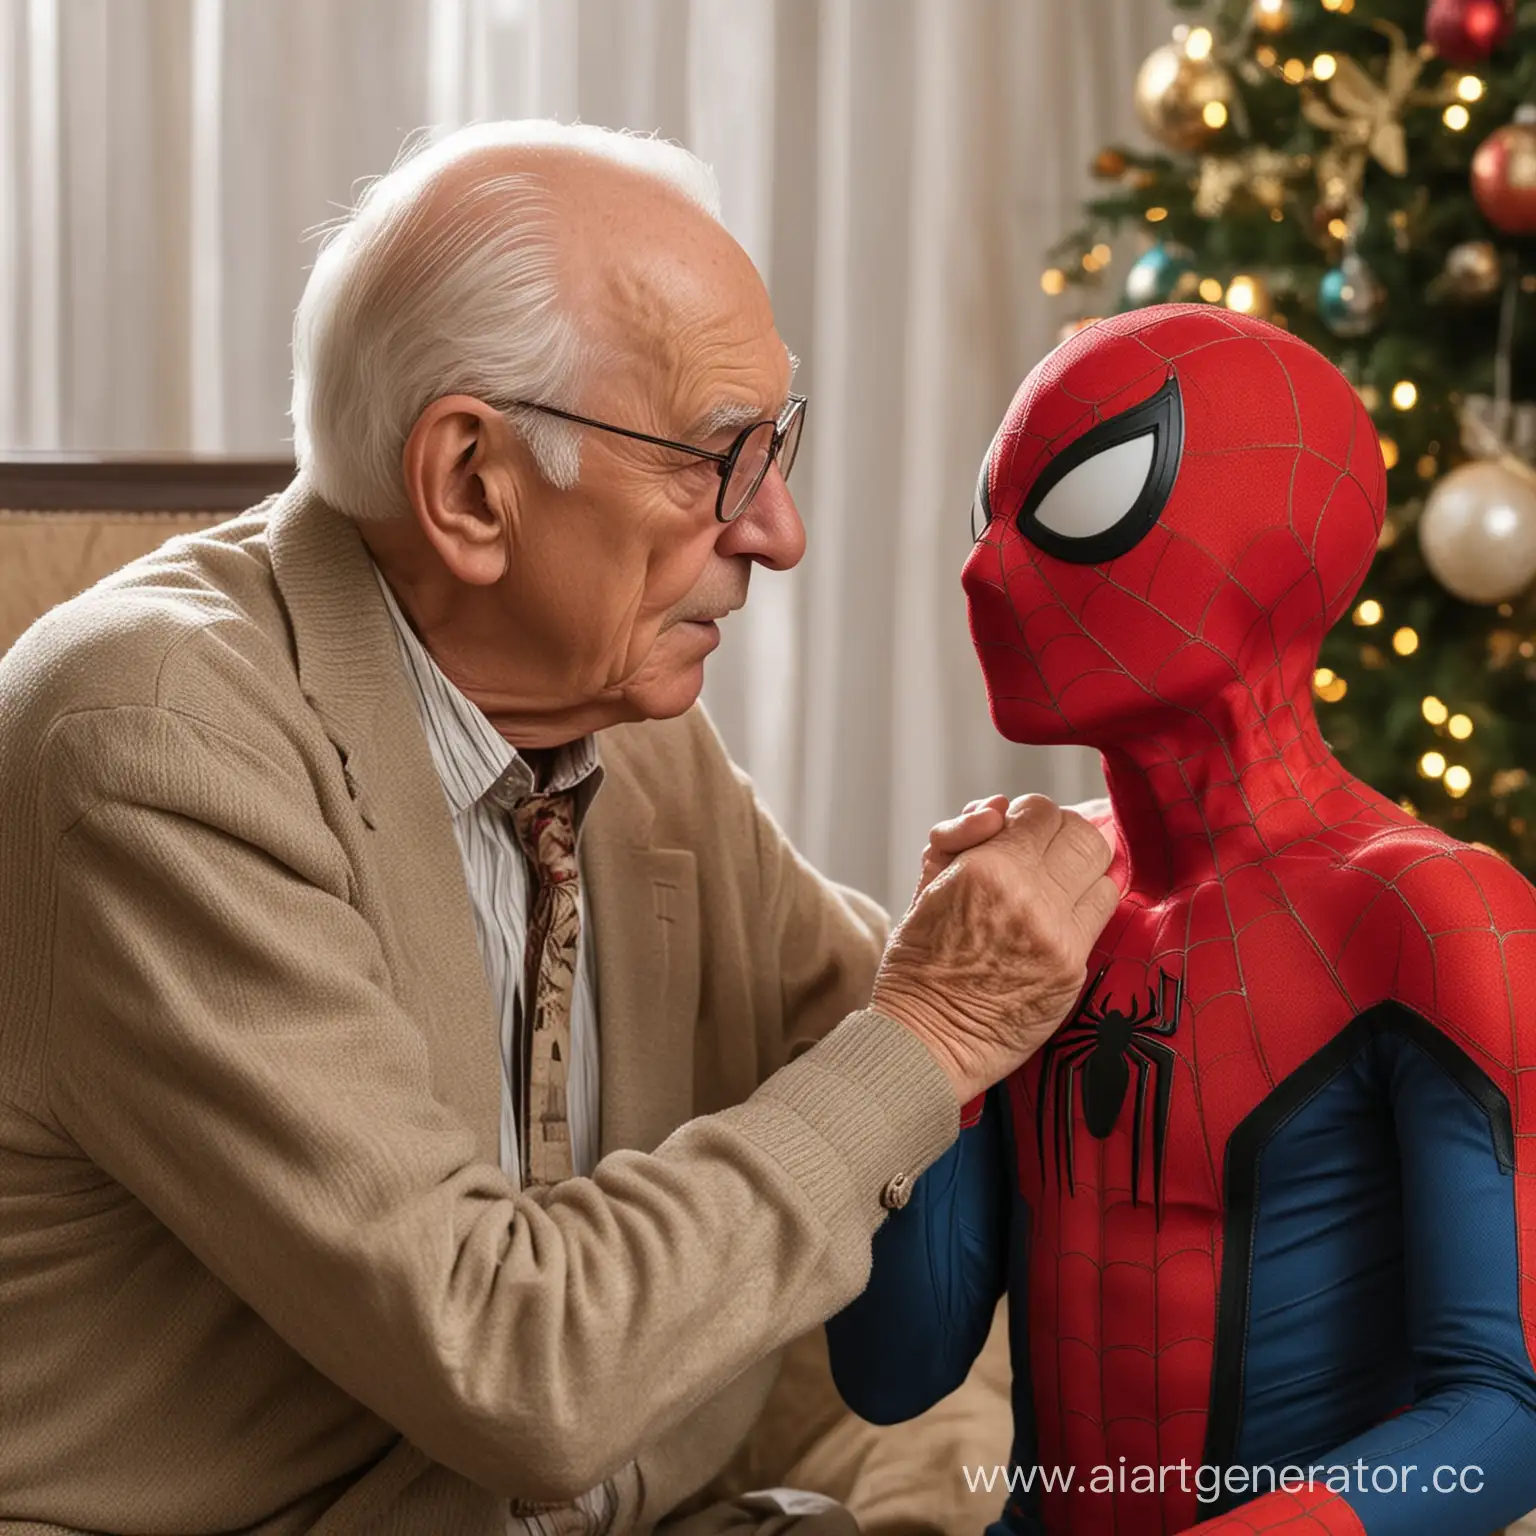 
Spider-man kisses his grandfather's hand and puts it on his head during the holiday